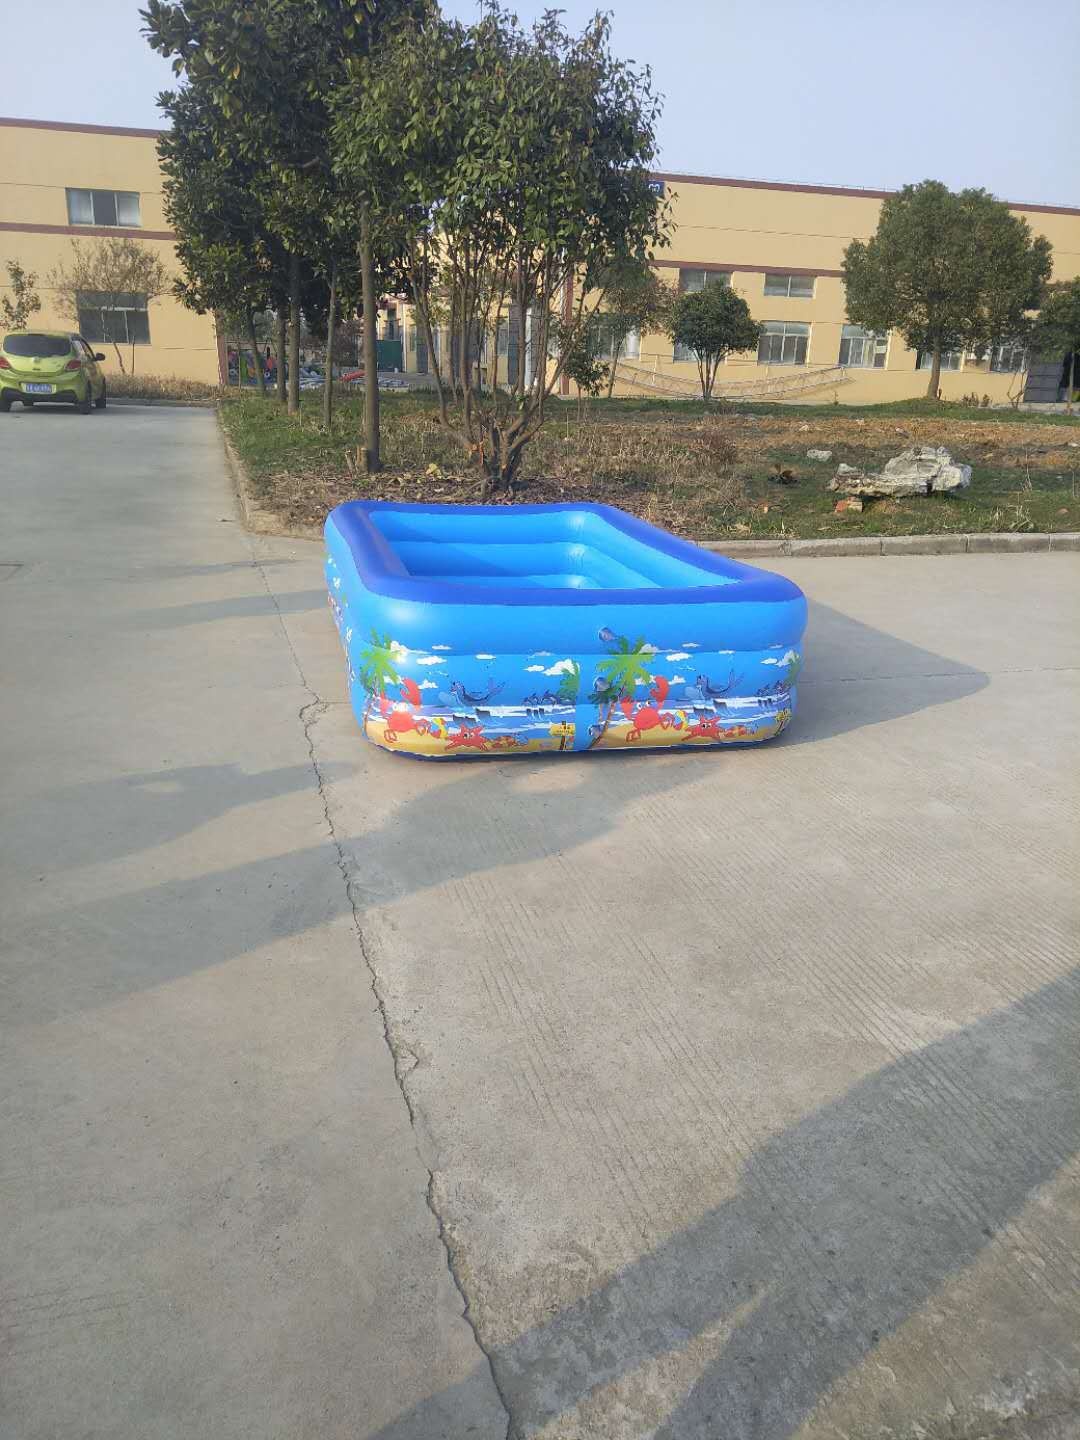 Inflatable swimming pool children and family swimming pool suitable in gardens backyards and outdoor summer water parties